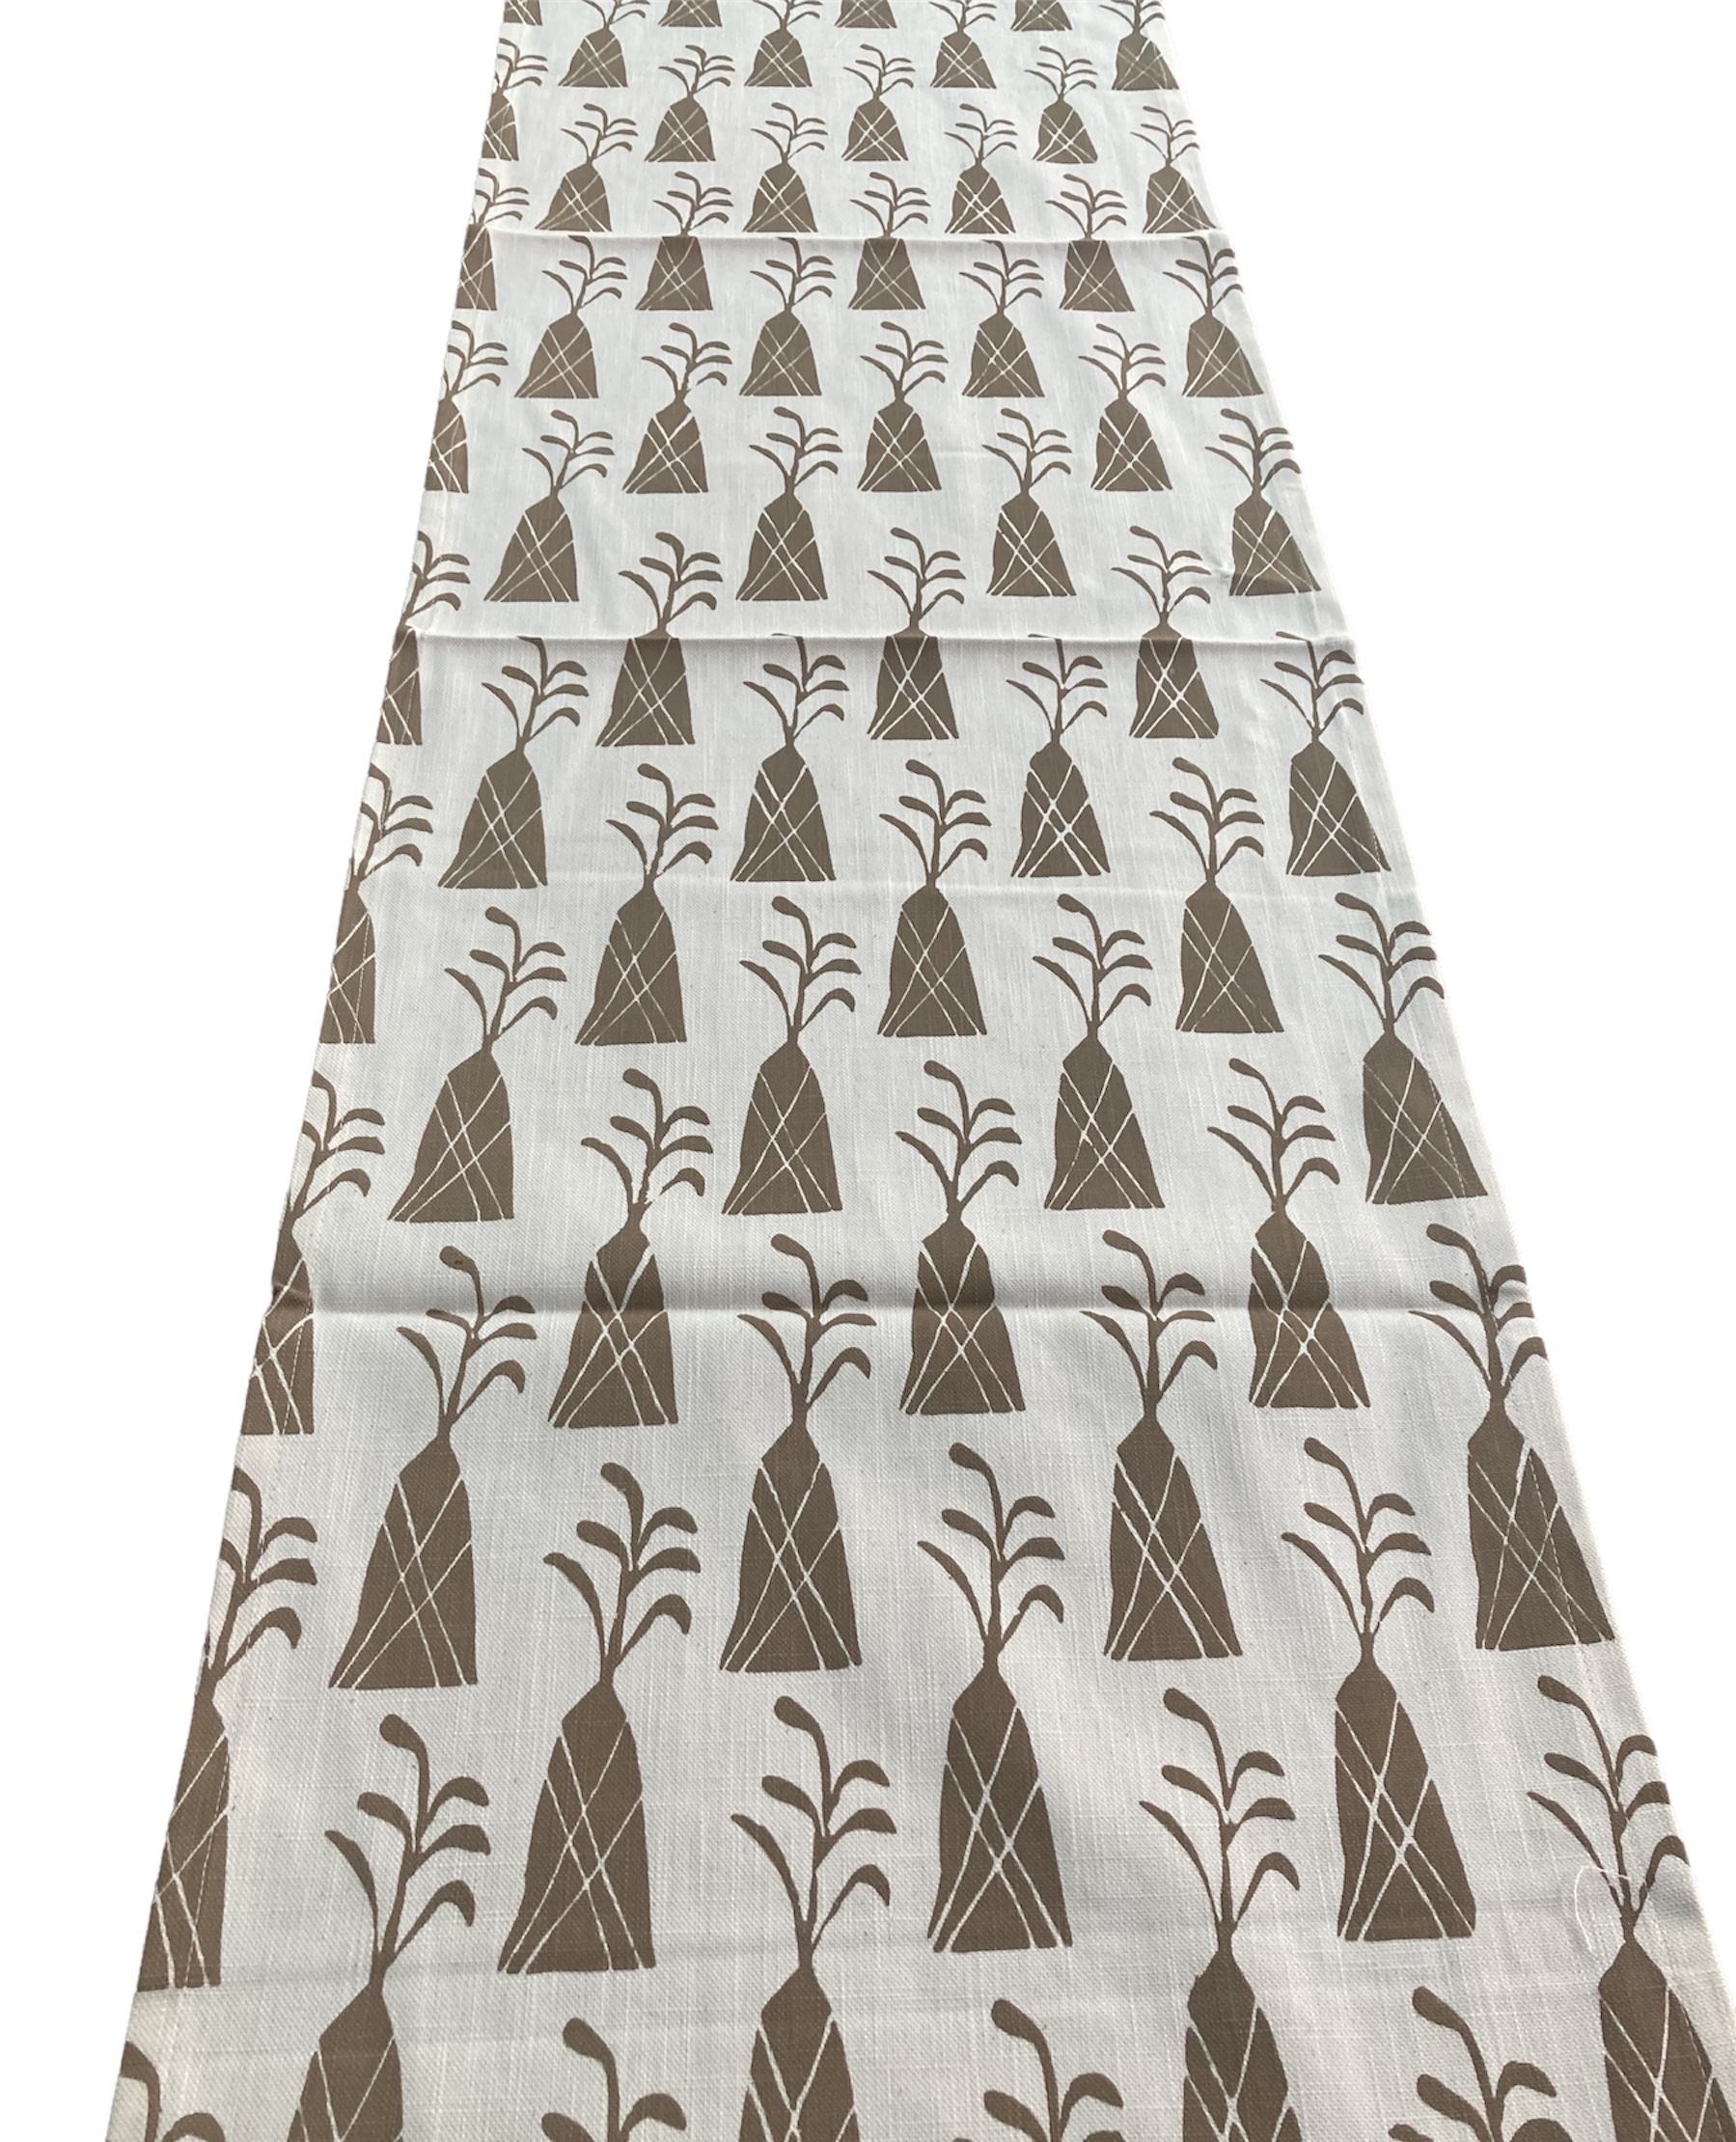 100% cotton Table Runner 96" x 16" from Namibia - Design 23l